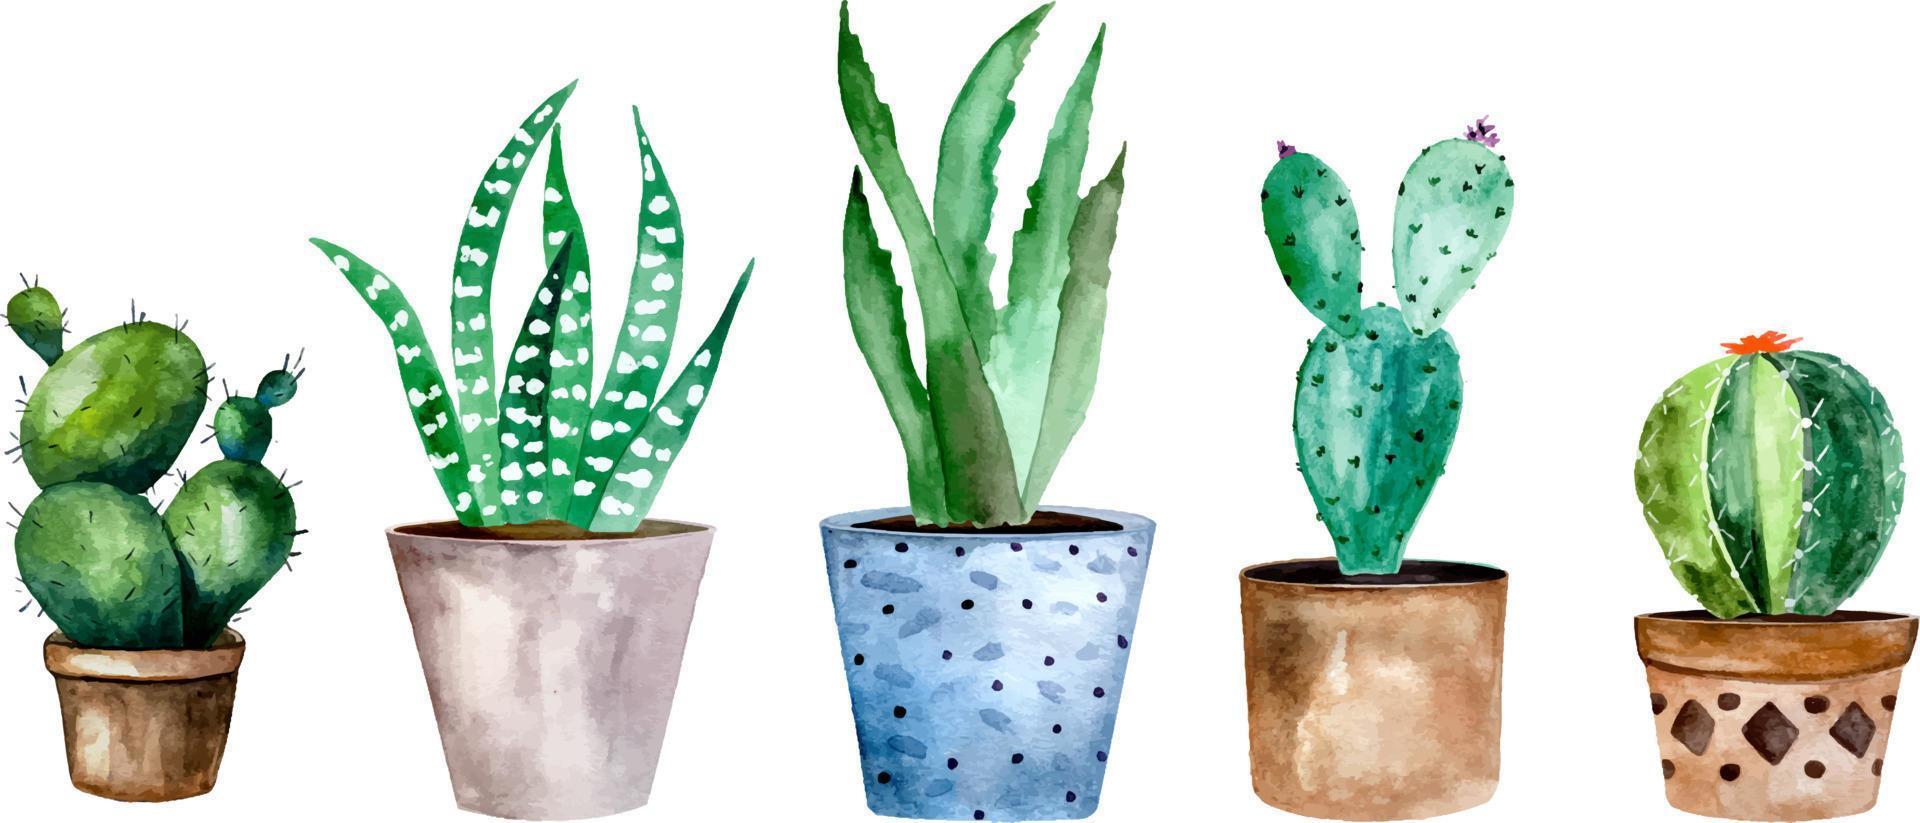 Watercolor illustration of cactus and succulent plants in pot. Watercolor individual flower pot vector